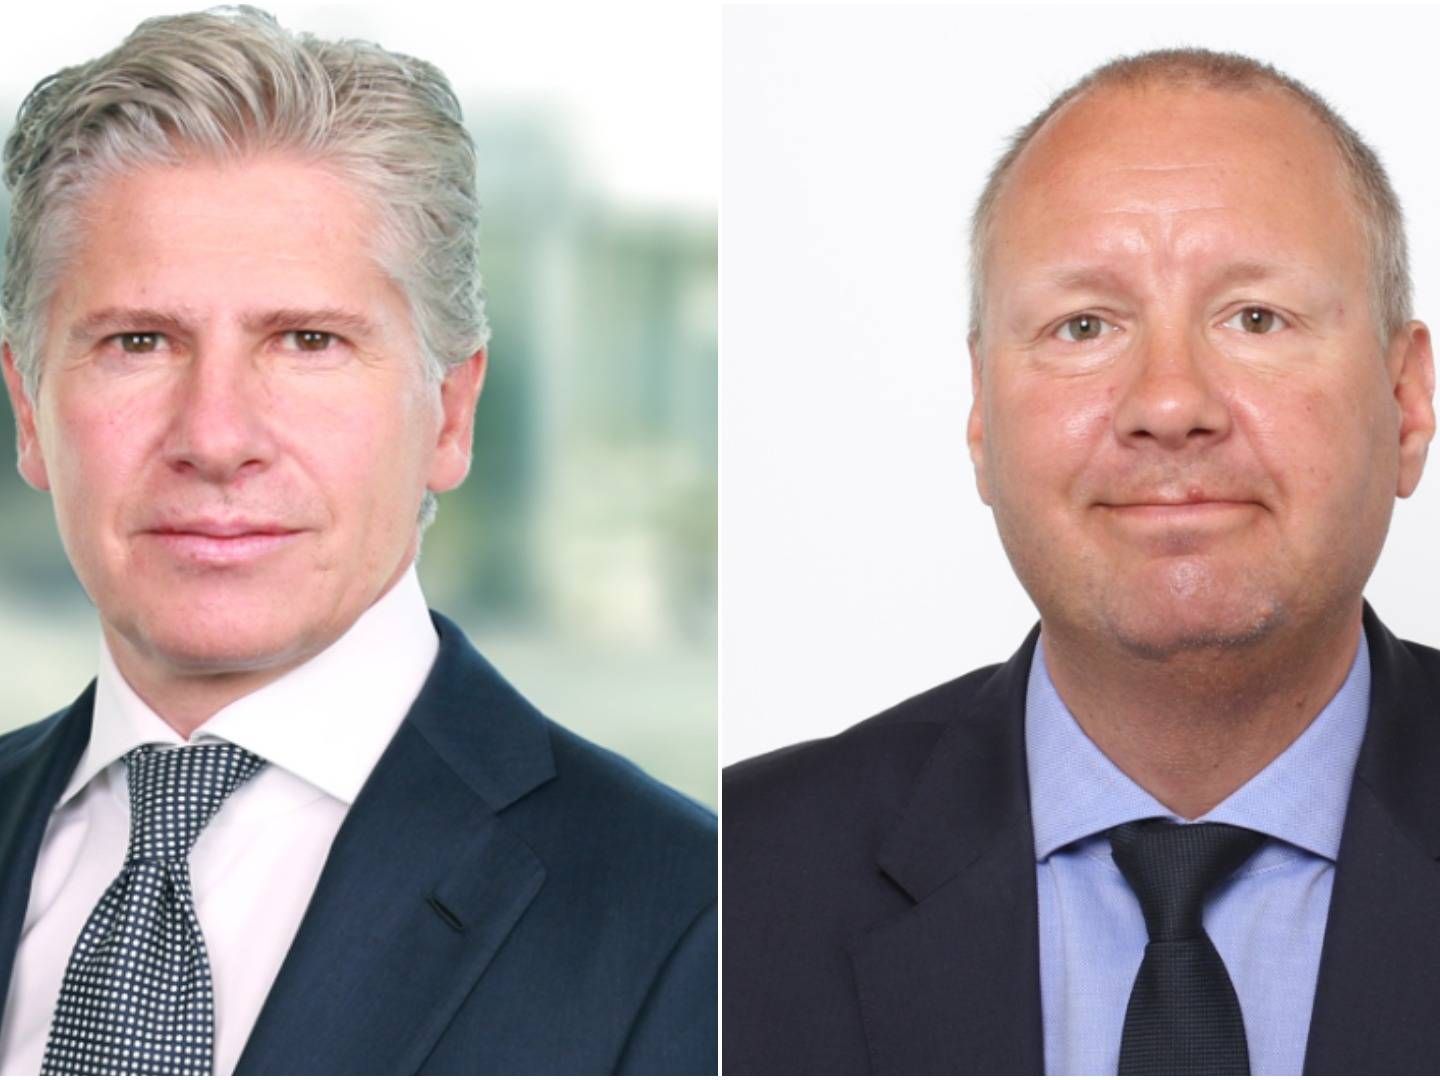 LGT Capital Partners' Pius Fritschi, Managing Partner, and Jetro Siekkinen, Head of Emerging Market Fixed Income. | Photo: PR: LGT Capital Partners.